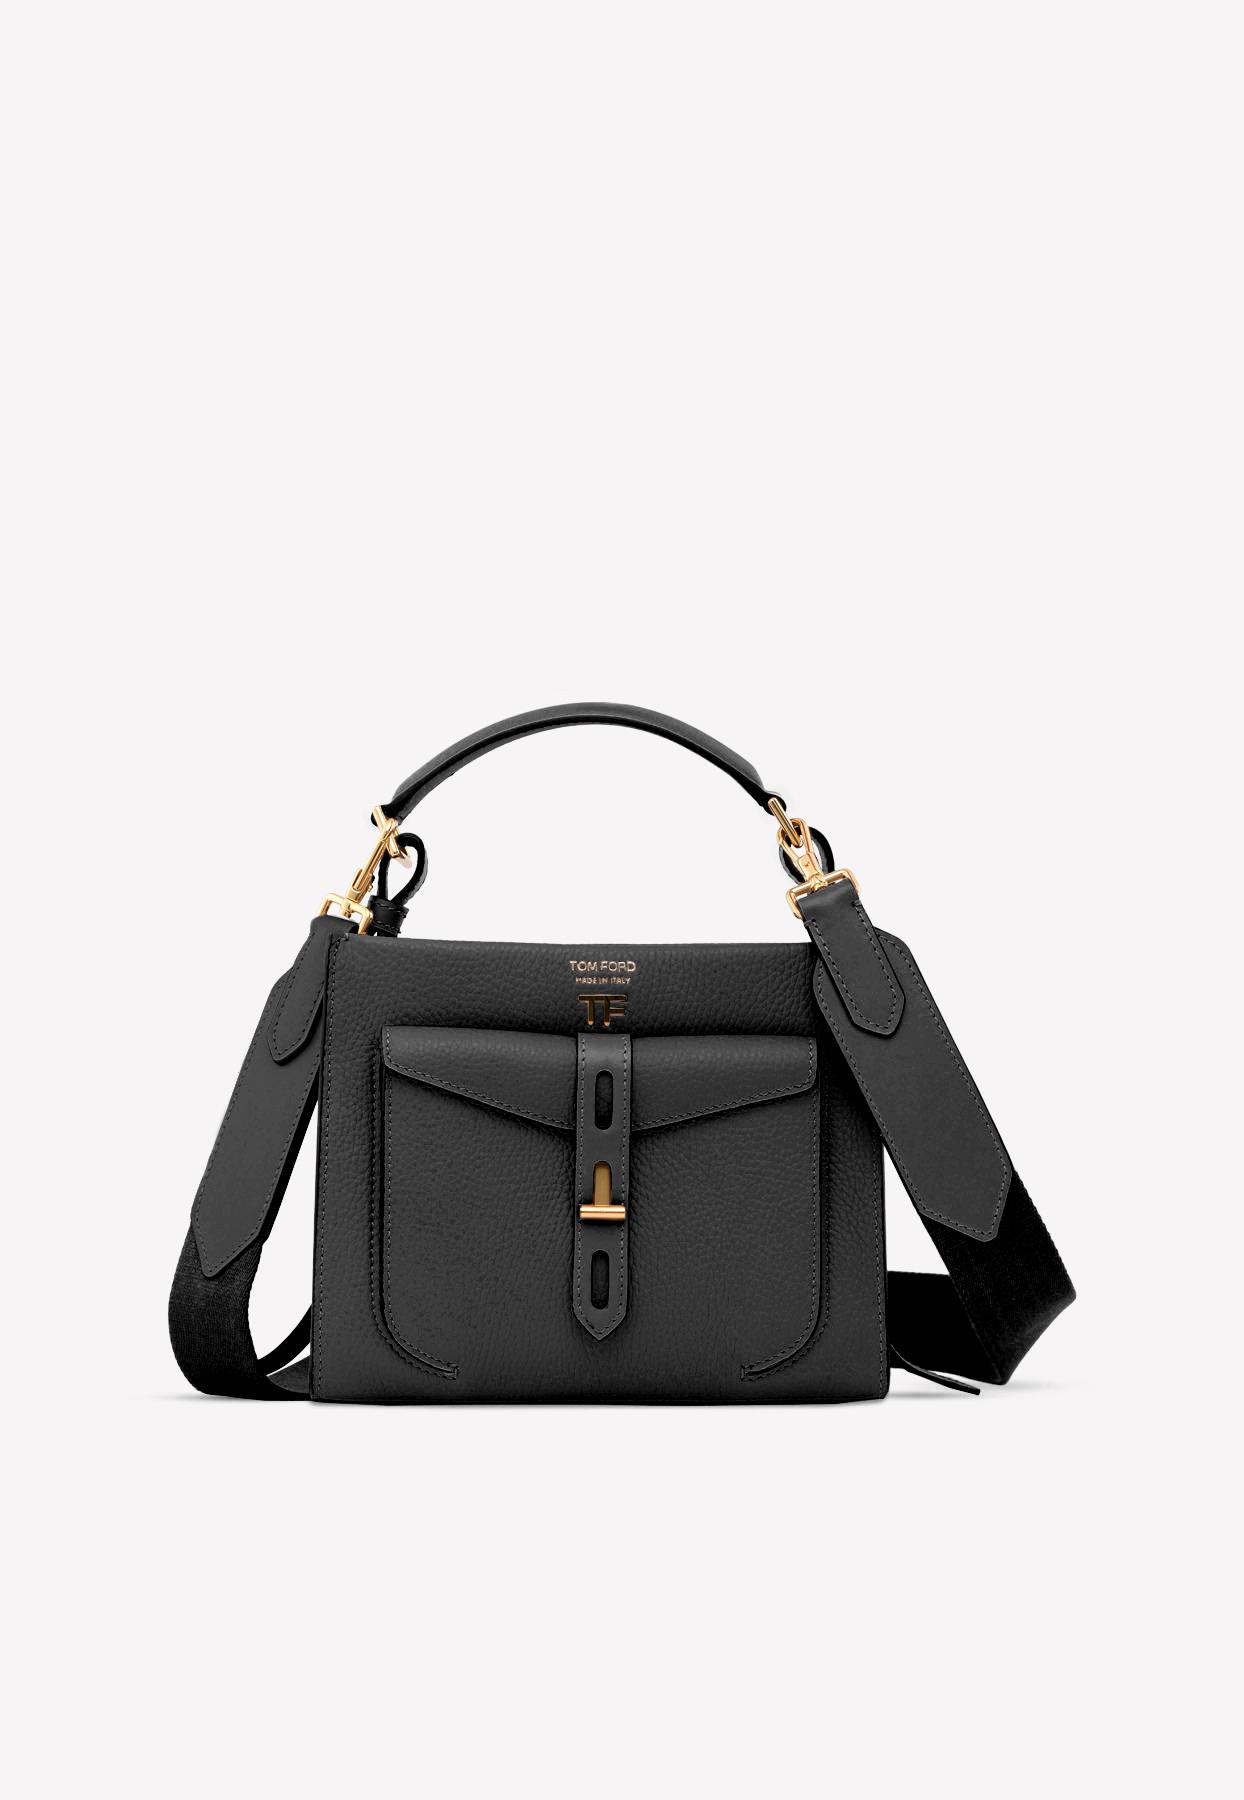 Unboxing TOM FORD grain leather T twist mini top handle bag 